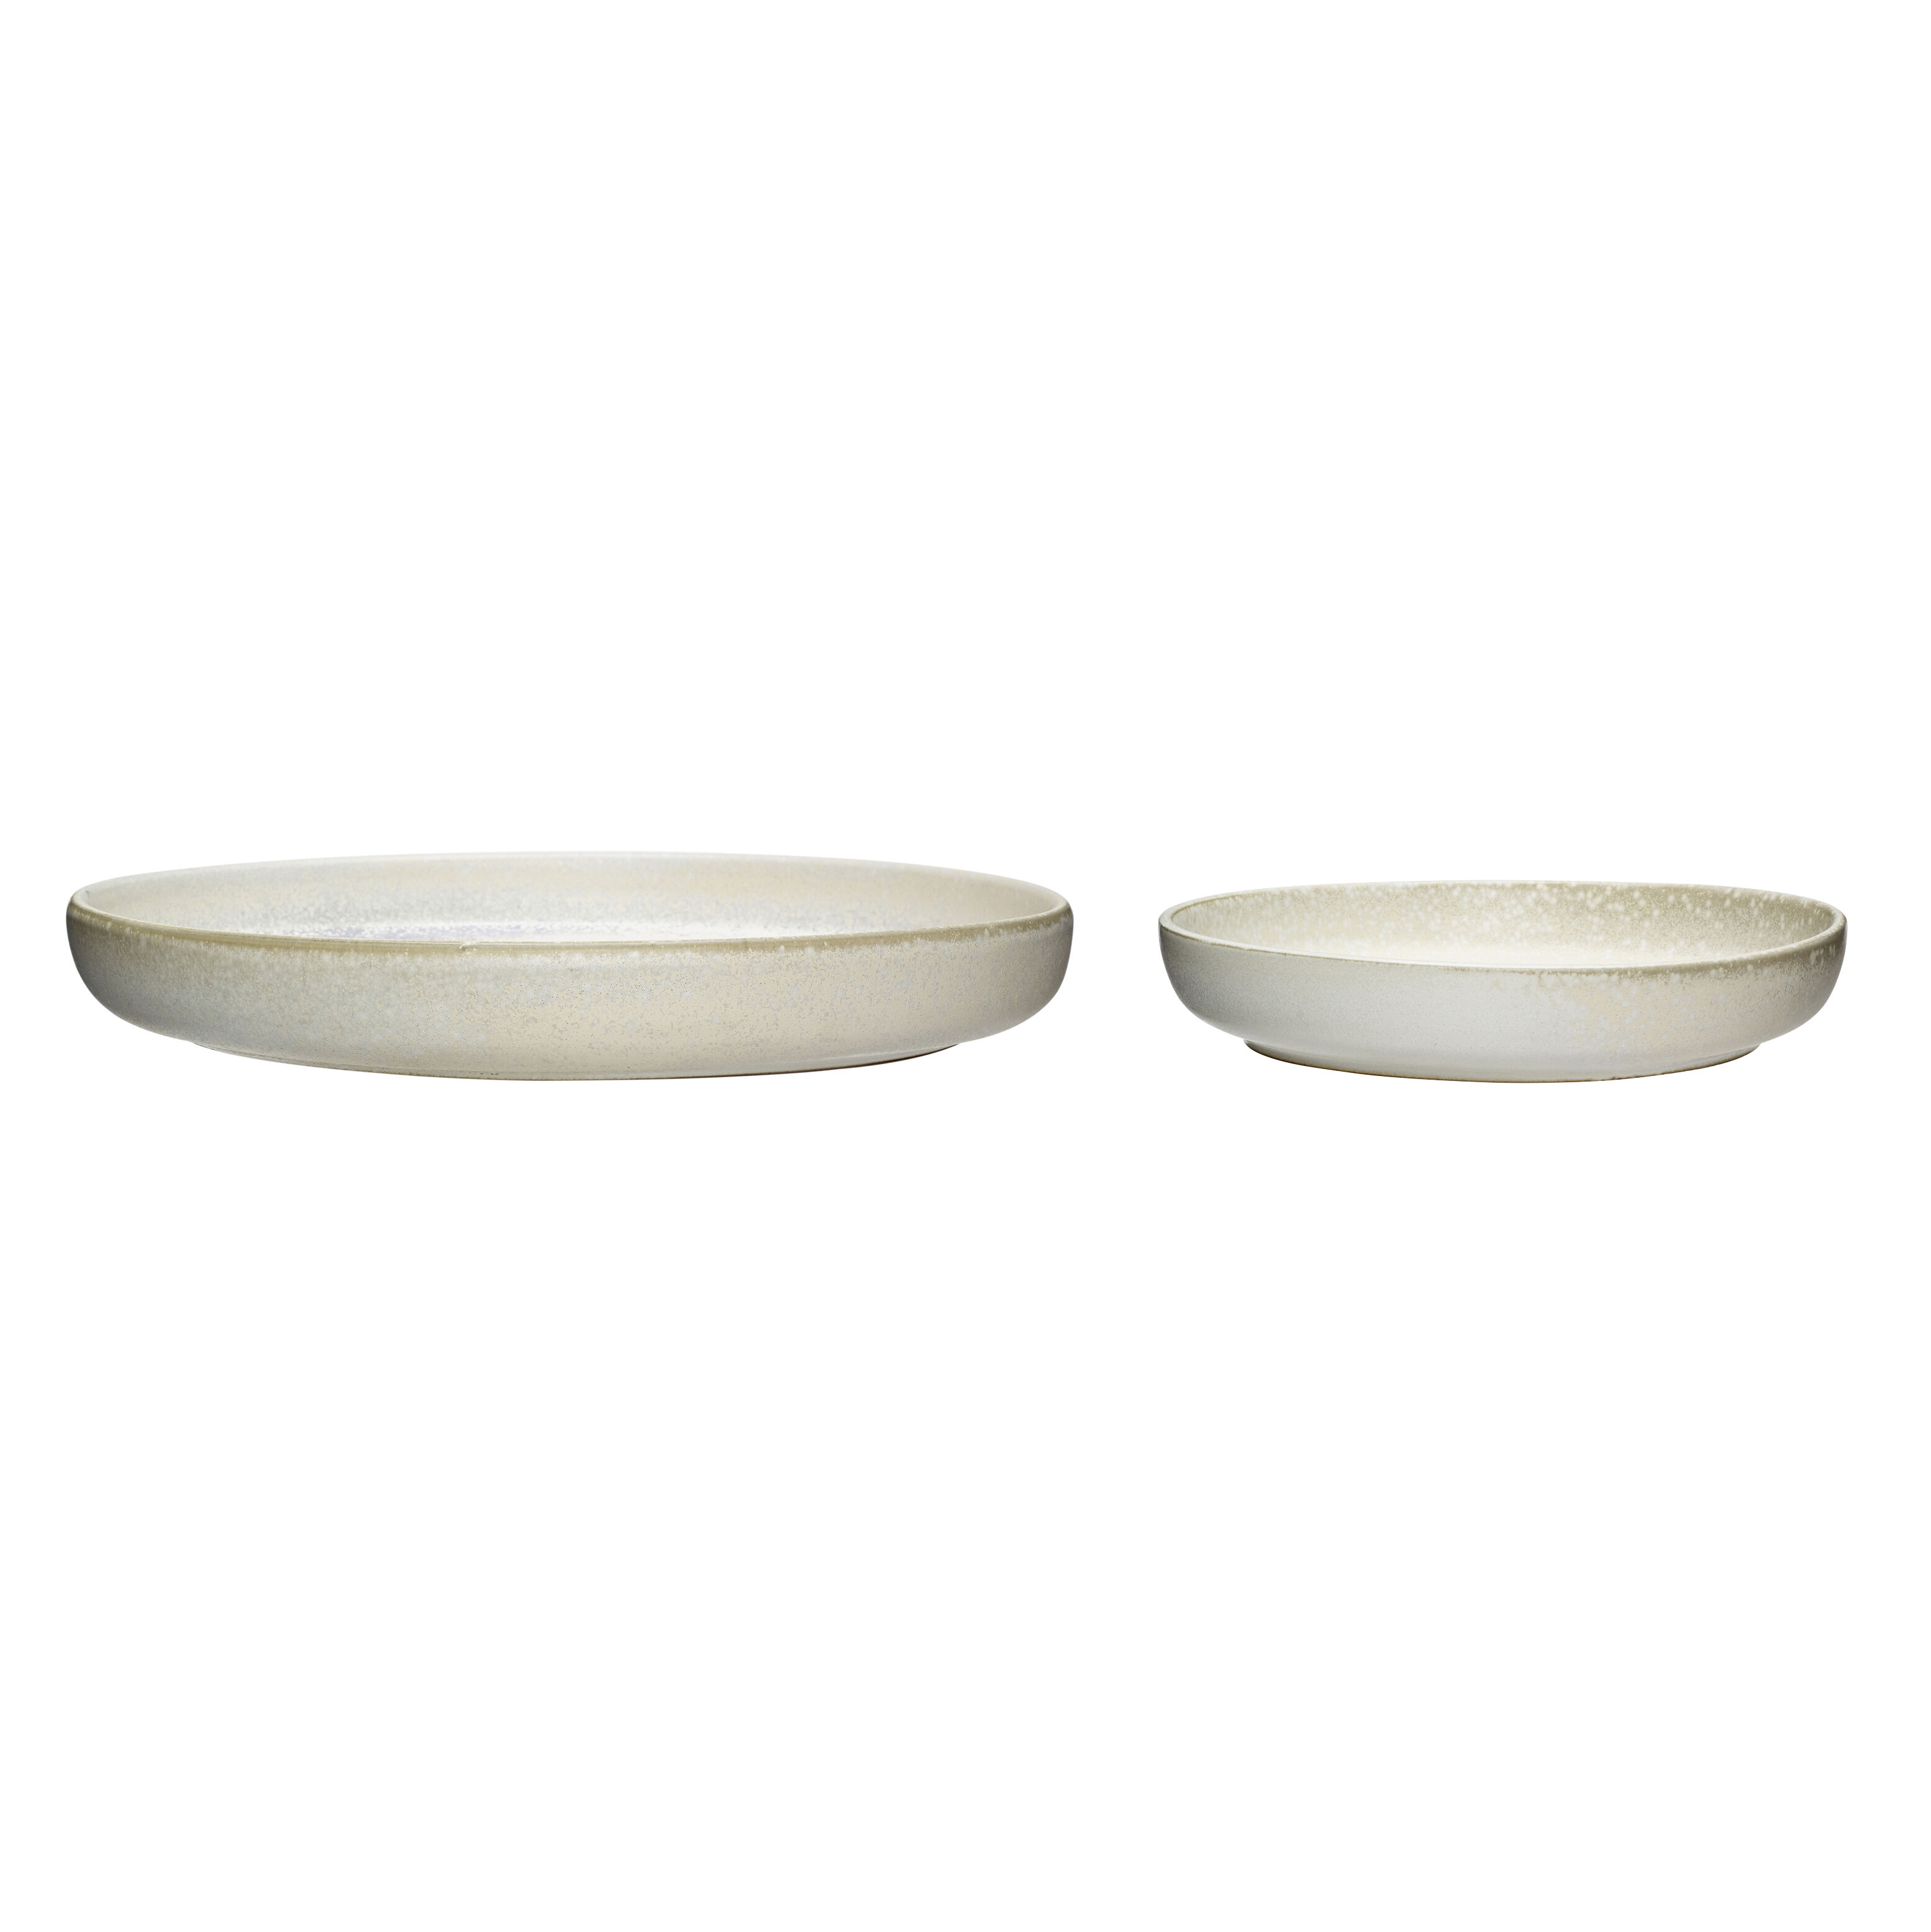 hubsch-set-of-2-clay-plates-in-off-white